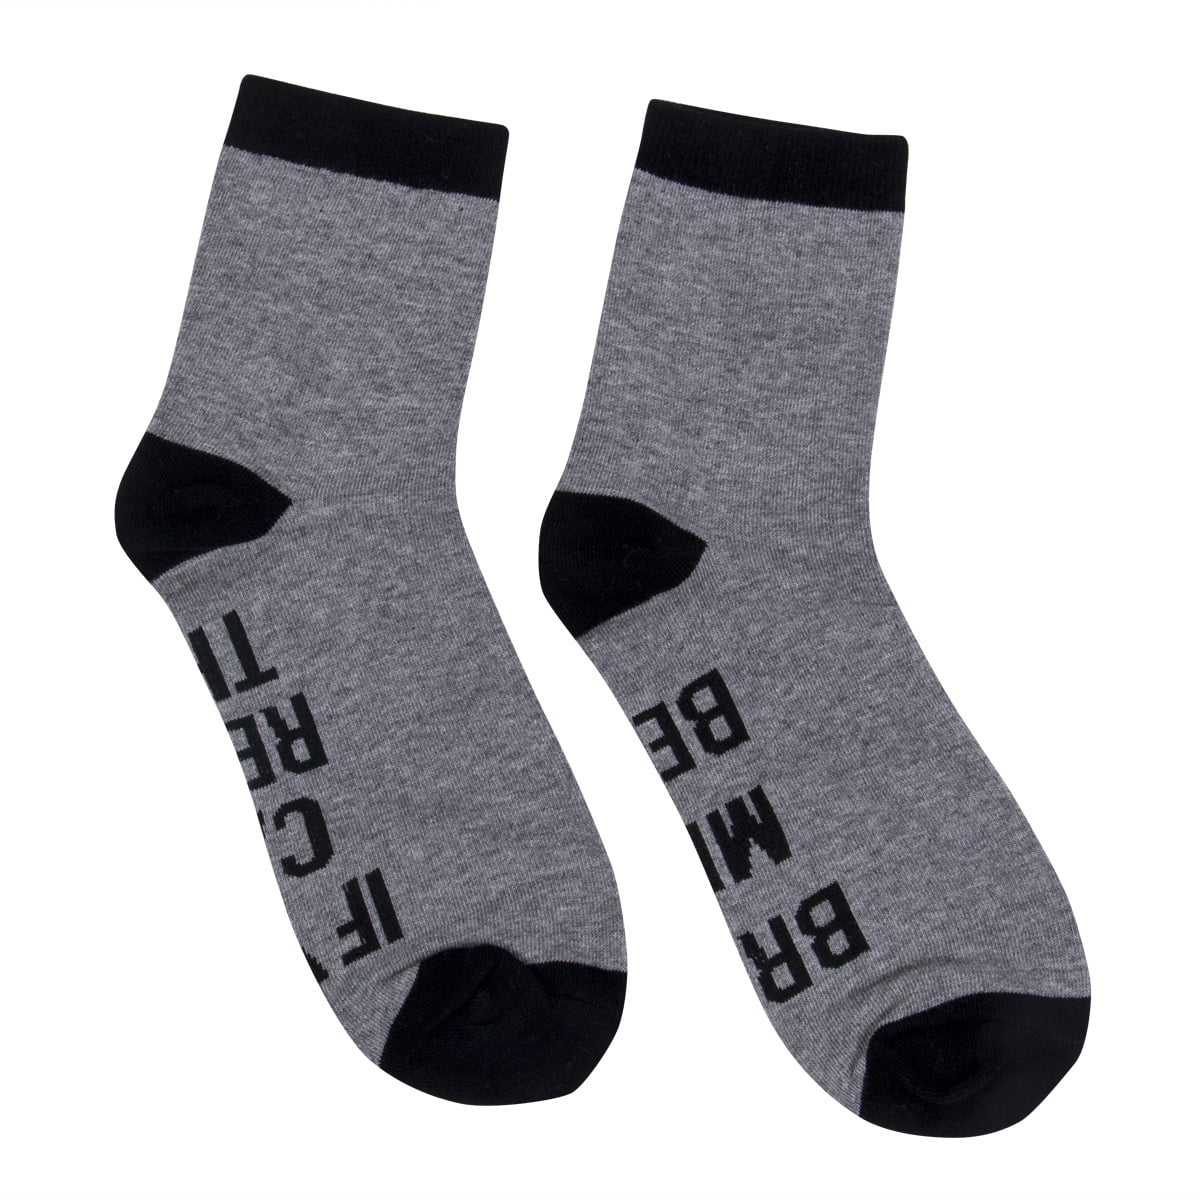 Mens Ankle Socks Breathable Summer Low Cut Crew Casual Sport Cotton Blend Socks 